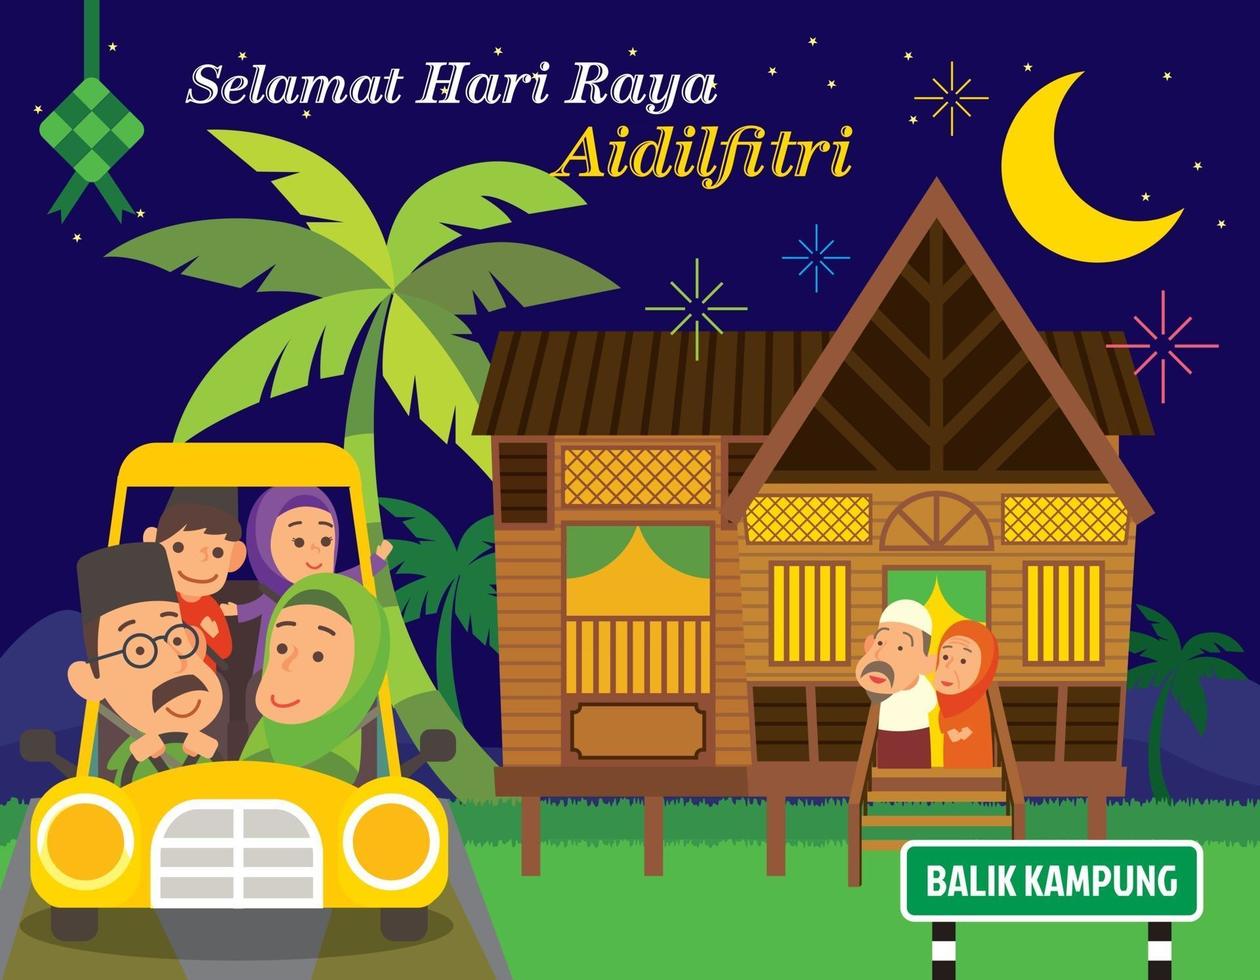 Muslim family back to hometown by car to meet with grandparent for celebrating Muslim festival Hari Raya  in Traditional Malay village house vector